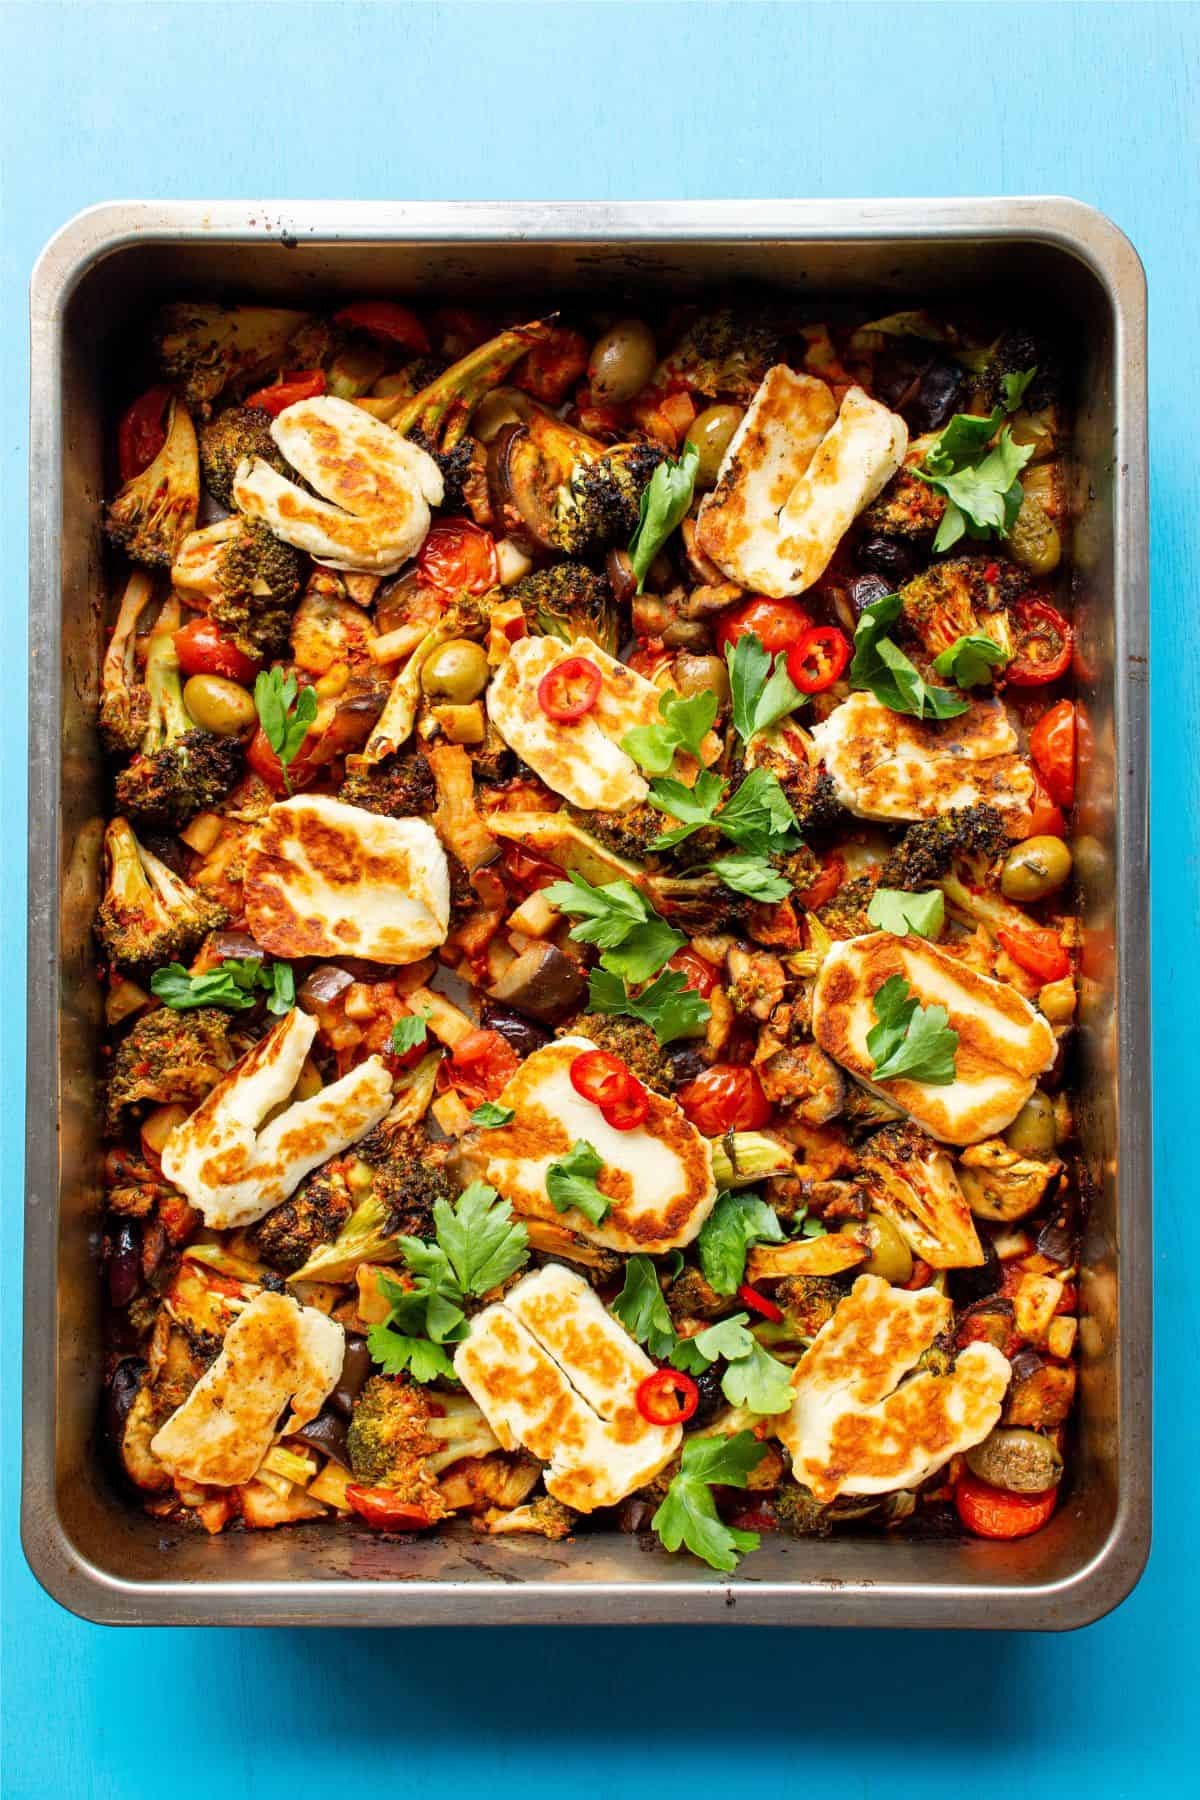 Roasted vegetables with olives and parsley, red chilli slices and golden bowned in halloumi in a baking tray.